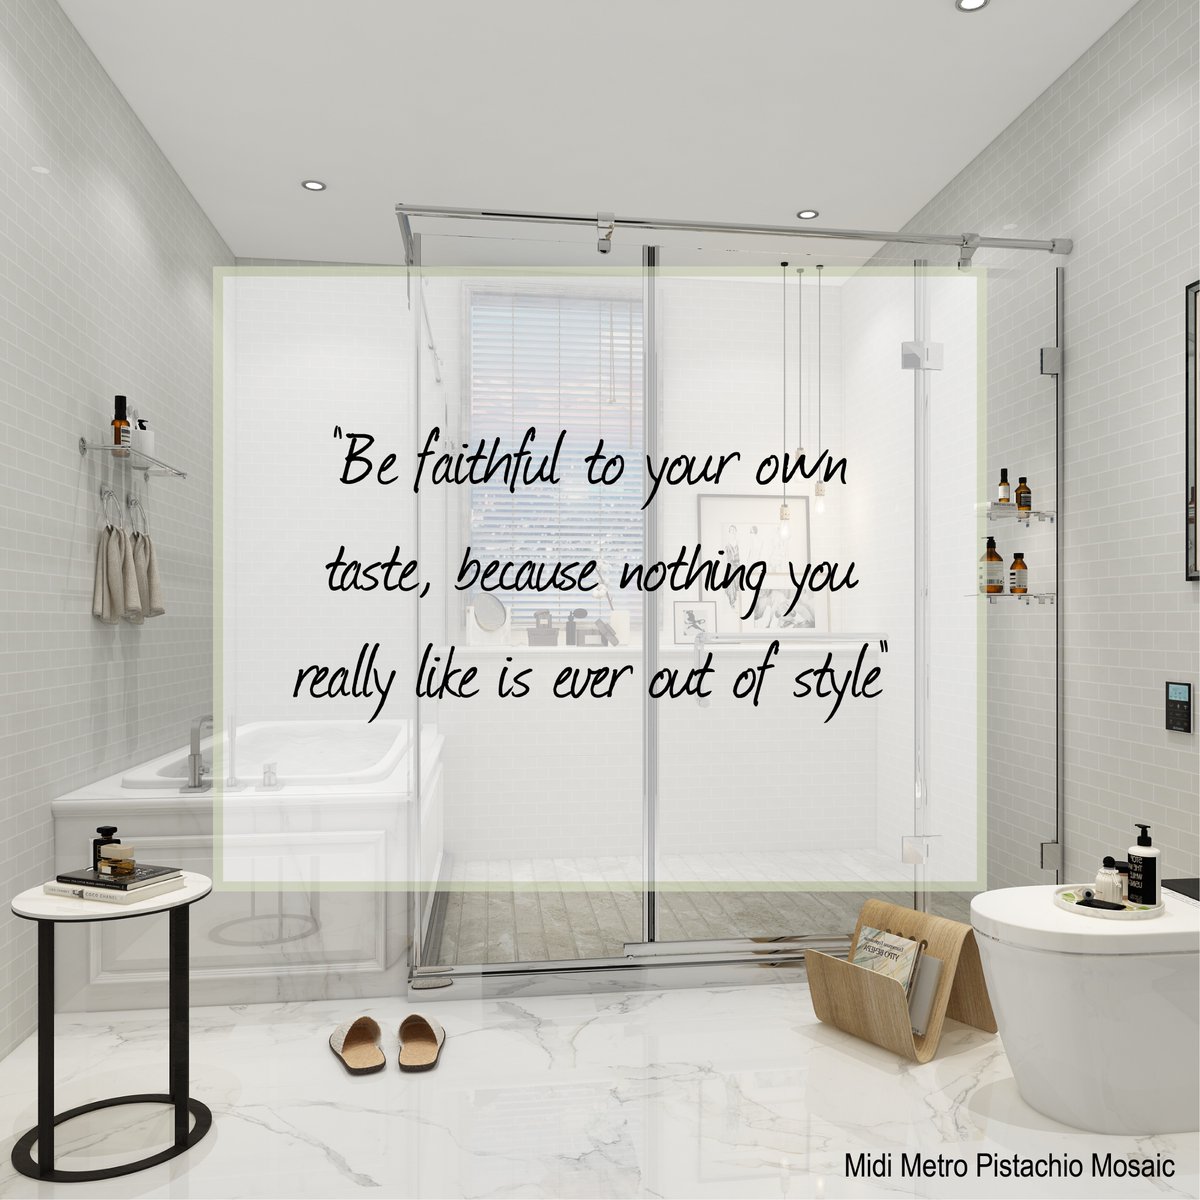 Be brave! What you love never goes out of fashion🏠 

#bathroomdecor #bathroomideas #howihome #dailydecordose #loveyourspace #tileslover #greeninterior #greeninteriors #mosaictiles #instahomedesign #interior4all #houseofmosaics #greenhome #greenhomedecor #pastelgreenaesthetic